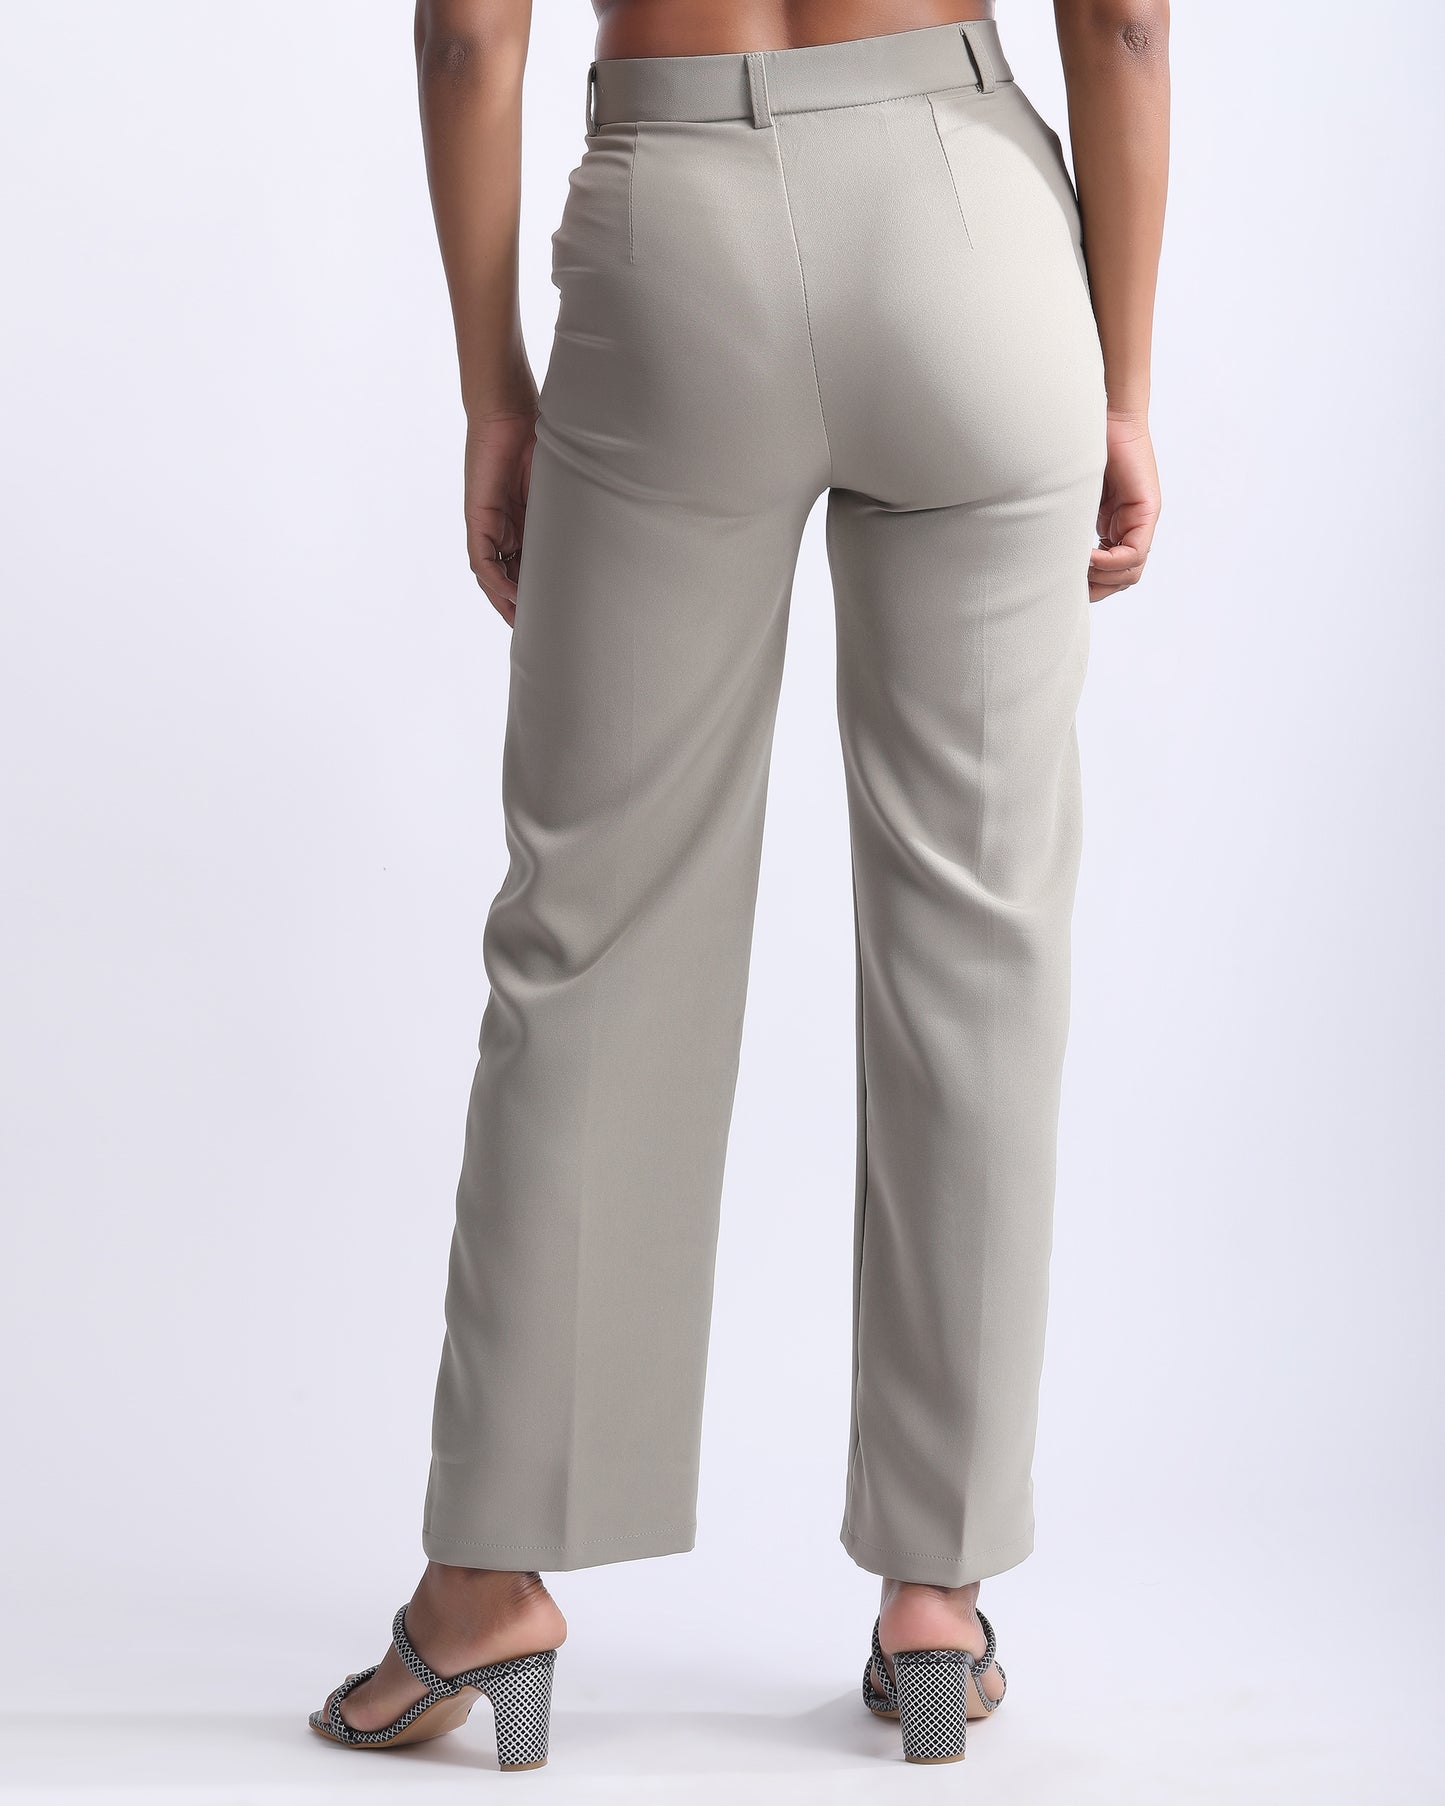 HIGH WAIST STRAIGHT FIT PANTS,ankle length, bottomwear, formal, high rise, pants, polyester, sage green, tailored fit, wide leg, woven,high-waist-straight-fit-pants-sagegreen,Color- Sage Green
Fit- Straight Fit 
Length- Full Length  
Rise- High Rise 
Waist- High Waist 
Closure- Zip 
No. of Pockets- 2 
Fabric- Polyester 
Print/Pattern- Solid